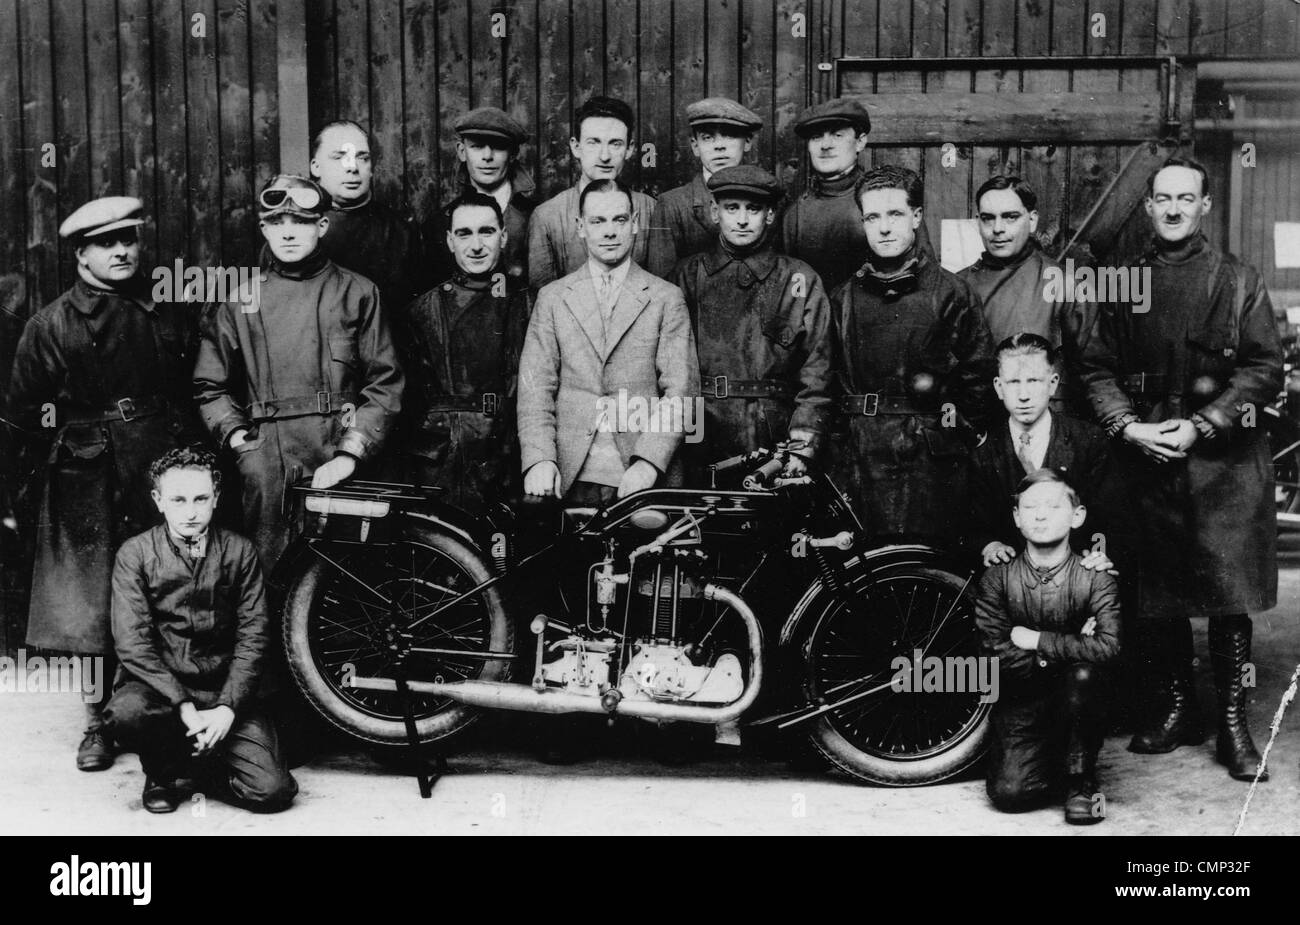 Motorcycle Riders, A. J. Stevens & Company Ltd., Wolverhampton, Early 20th cent. A. J. Stevens (AJS) motorcycle riders with an Stock Photo